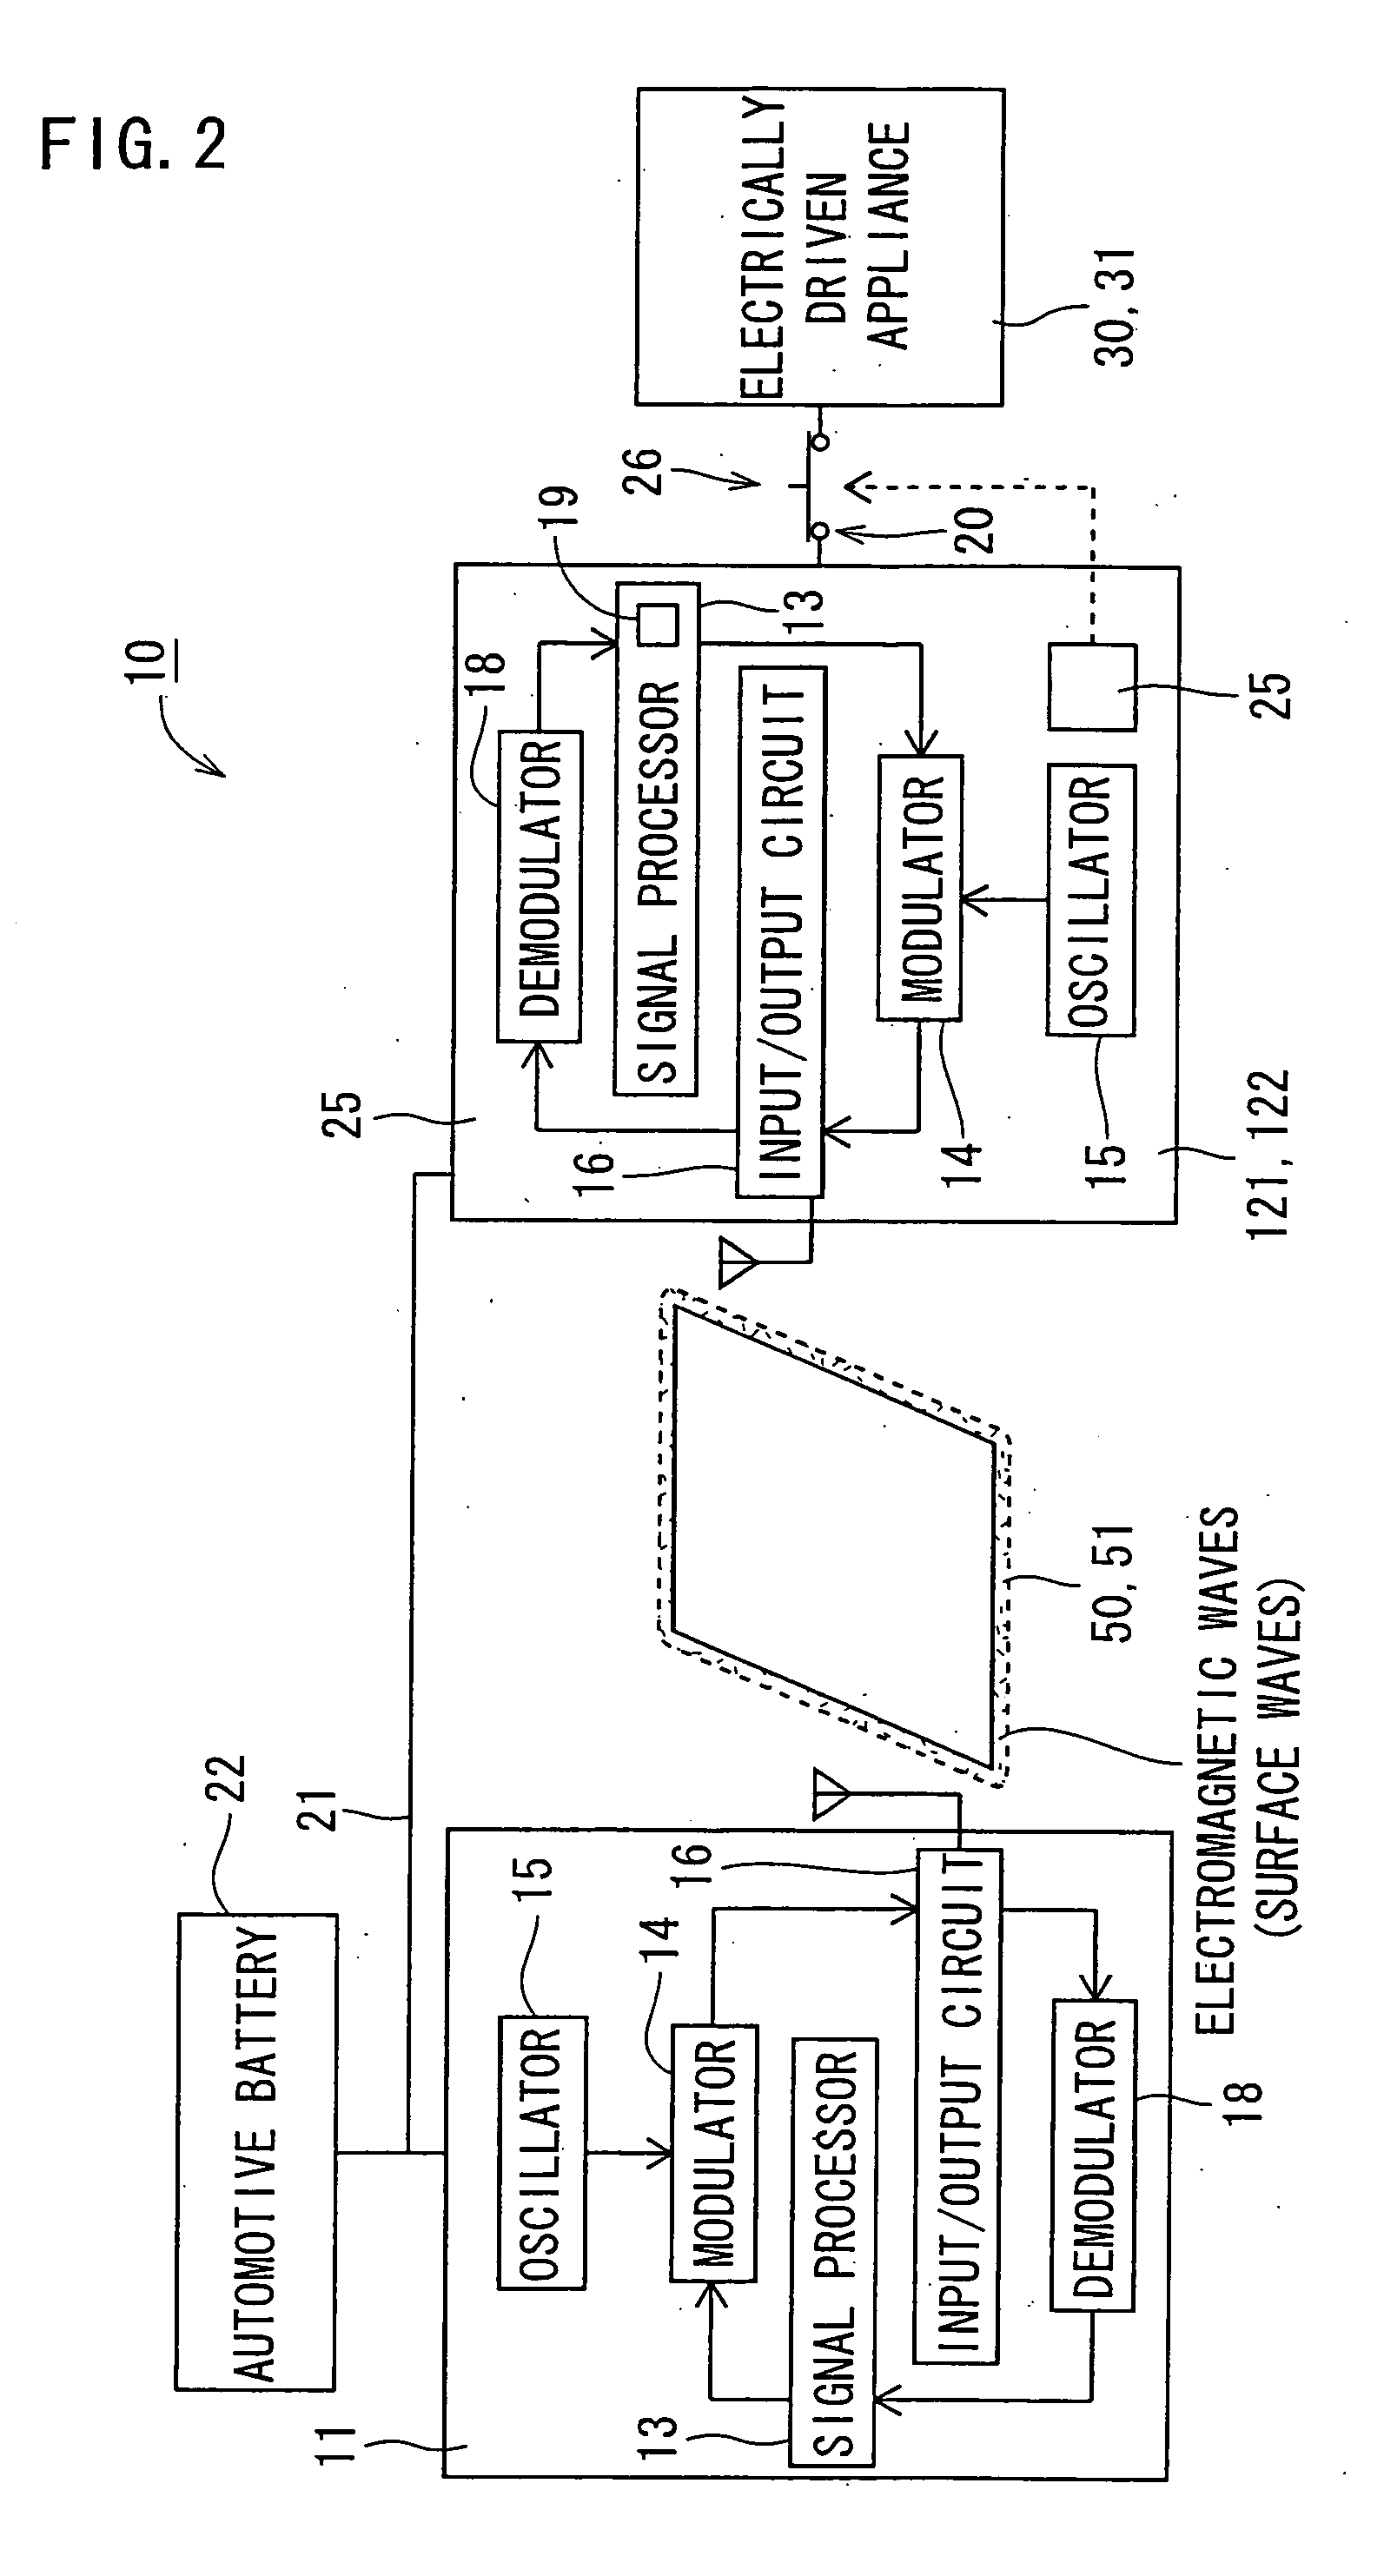 Vehicle appliance control system